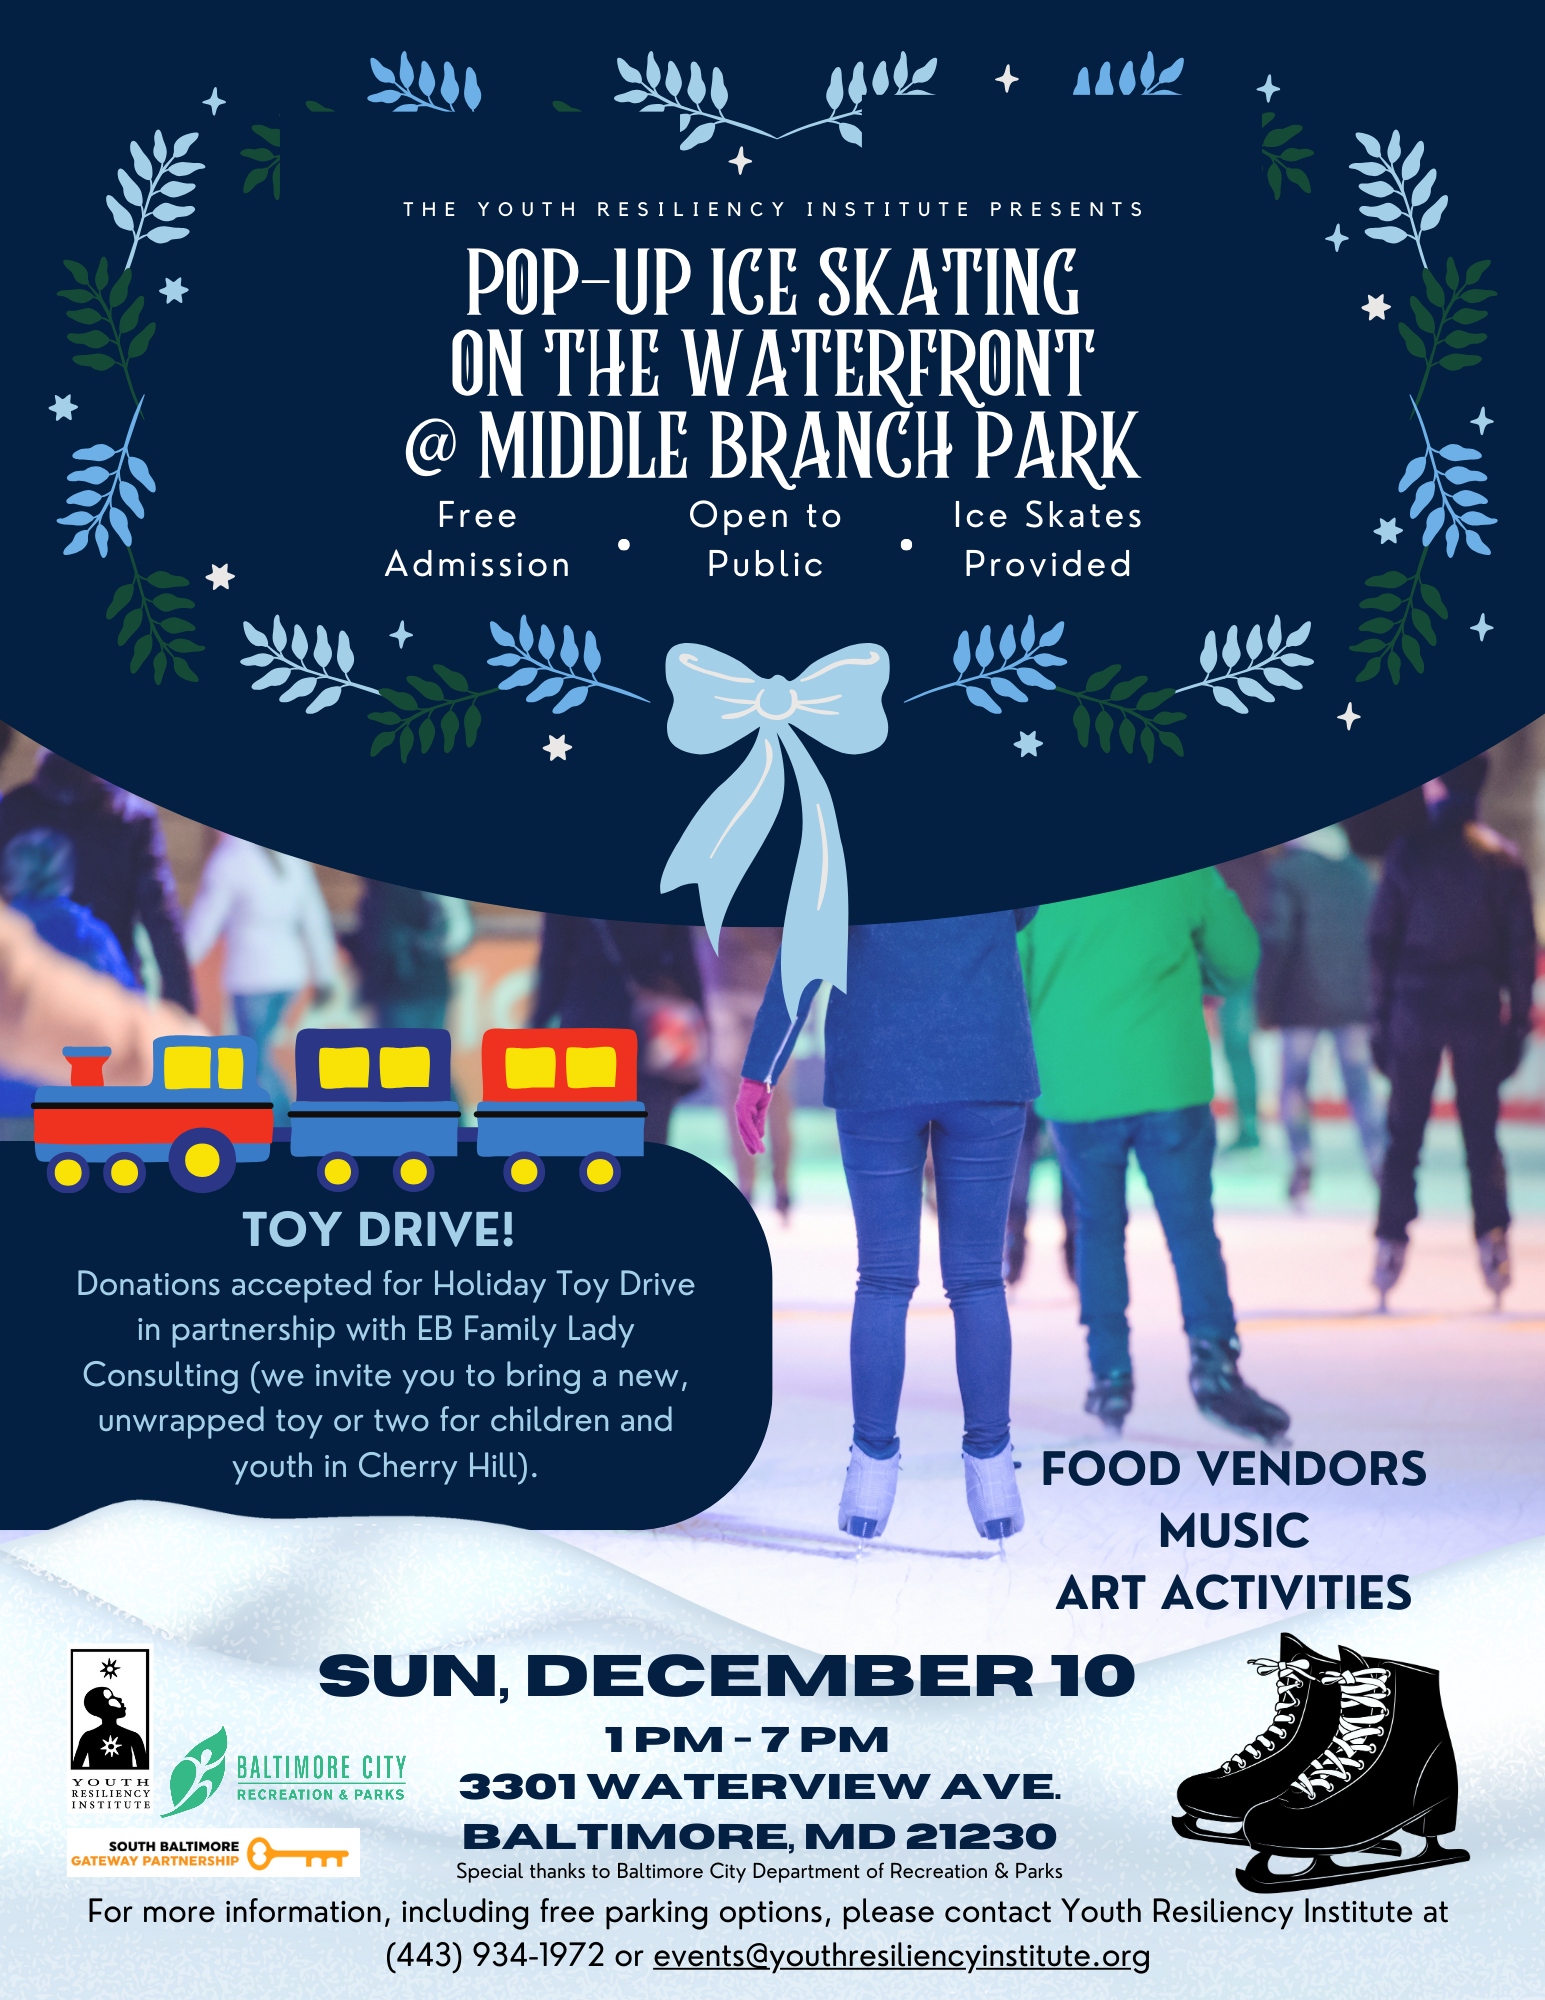 White and light blue text on a dark blue background over a photo of people ice-skating and the YRI, SBGP, and BCRP logos. Event info: Sunday, December 10, 1 - 7pm at Middle Branch Park: 3301 Waterview Avenue, Baltimore, MD, 21230. Toy Drive: Donations accepted for Holiday Toy Drive in partnership with EB Family Lady Consulting (we invite you to bring a new, unwrapped toy or two for chldren and youth in Cherry Hill. For more information, including free parking options, please contact YRI at 443-934-1972 or events@youthresiliencyinstitute.org